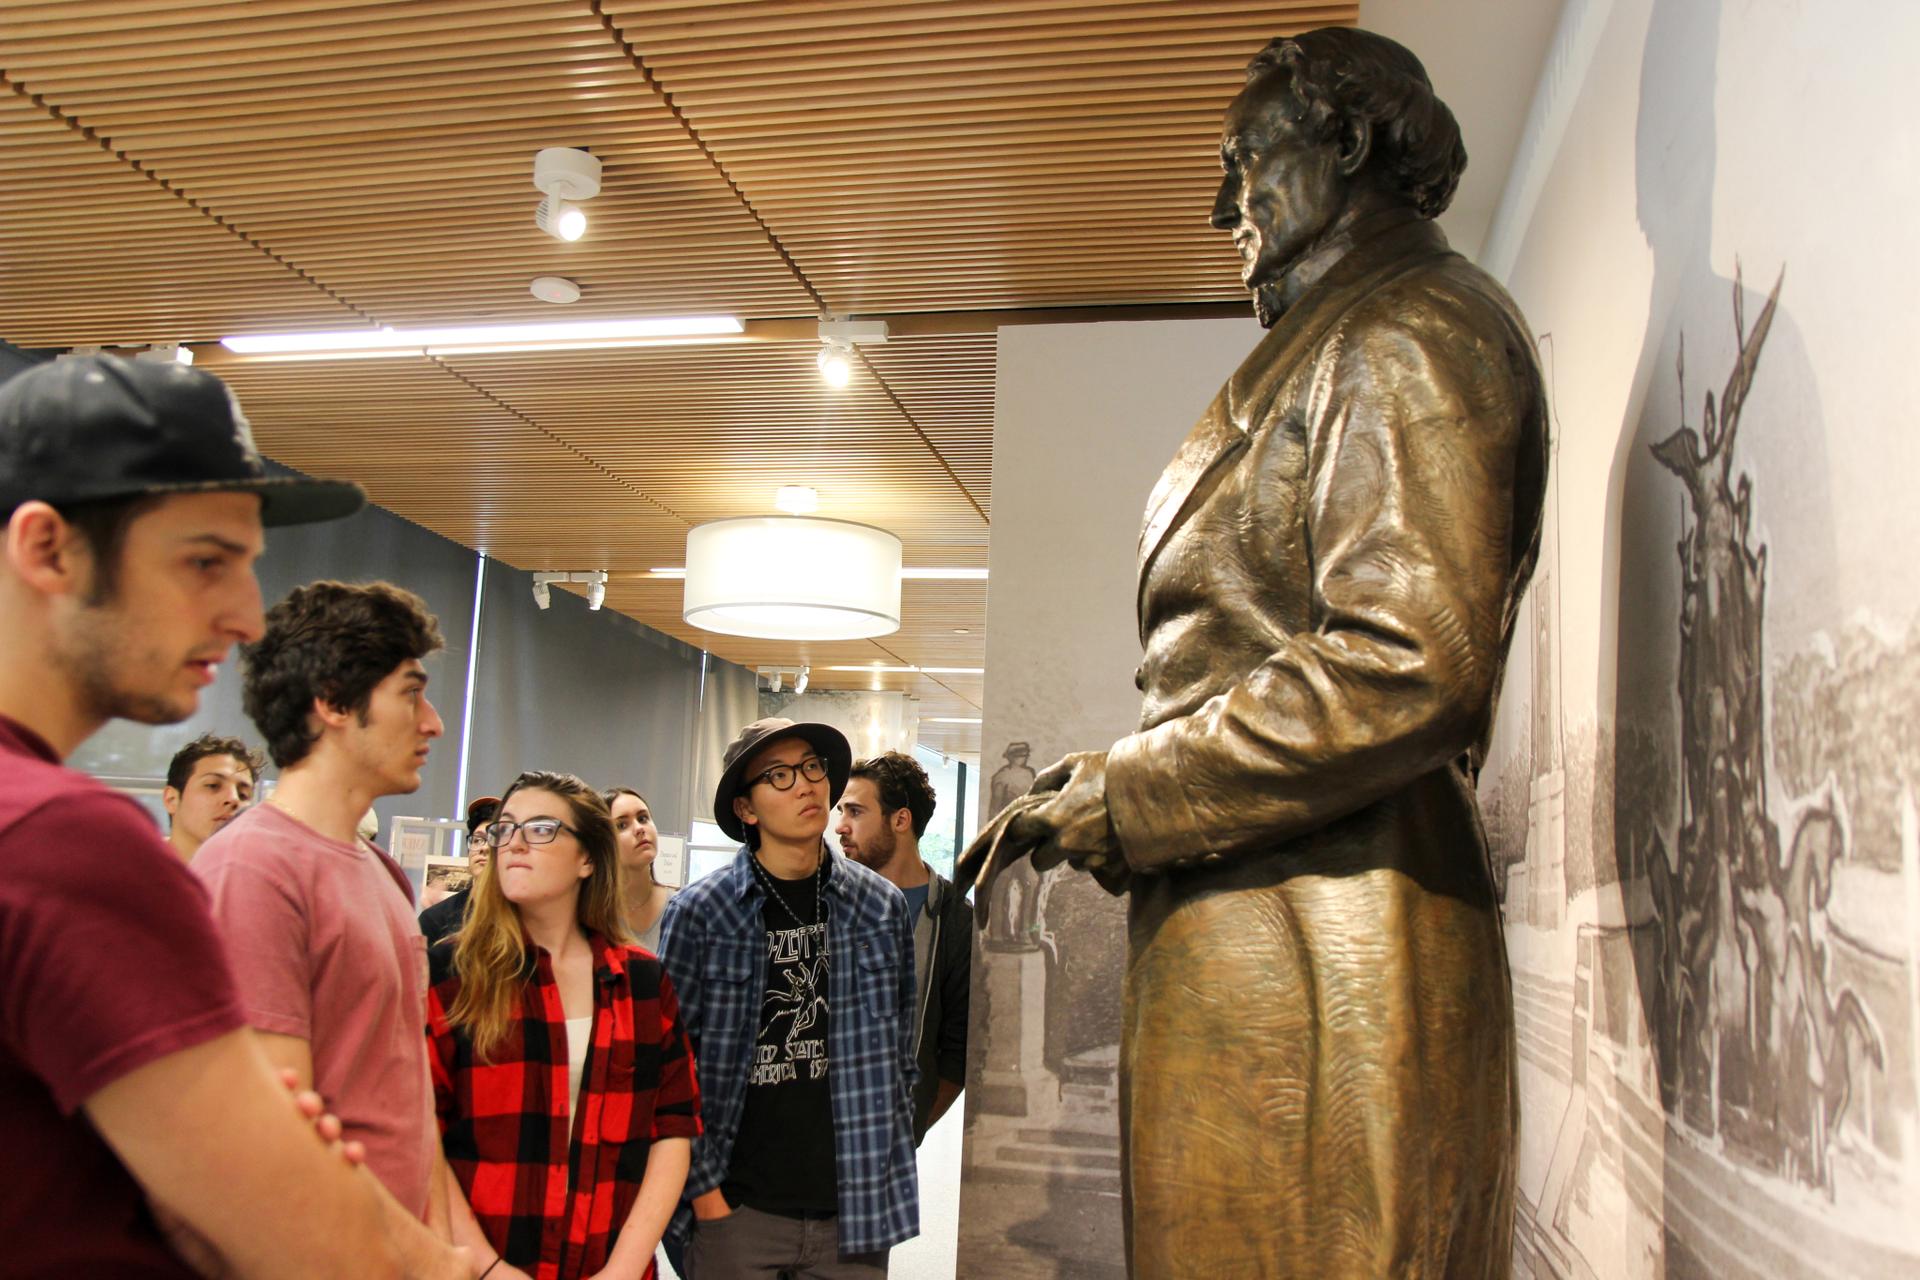 Students at the University of Texas at Austin visit the Jefferson Davis exhibit at the Dolph Briscoe Center for American History.